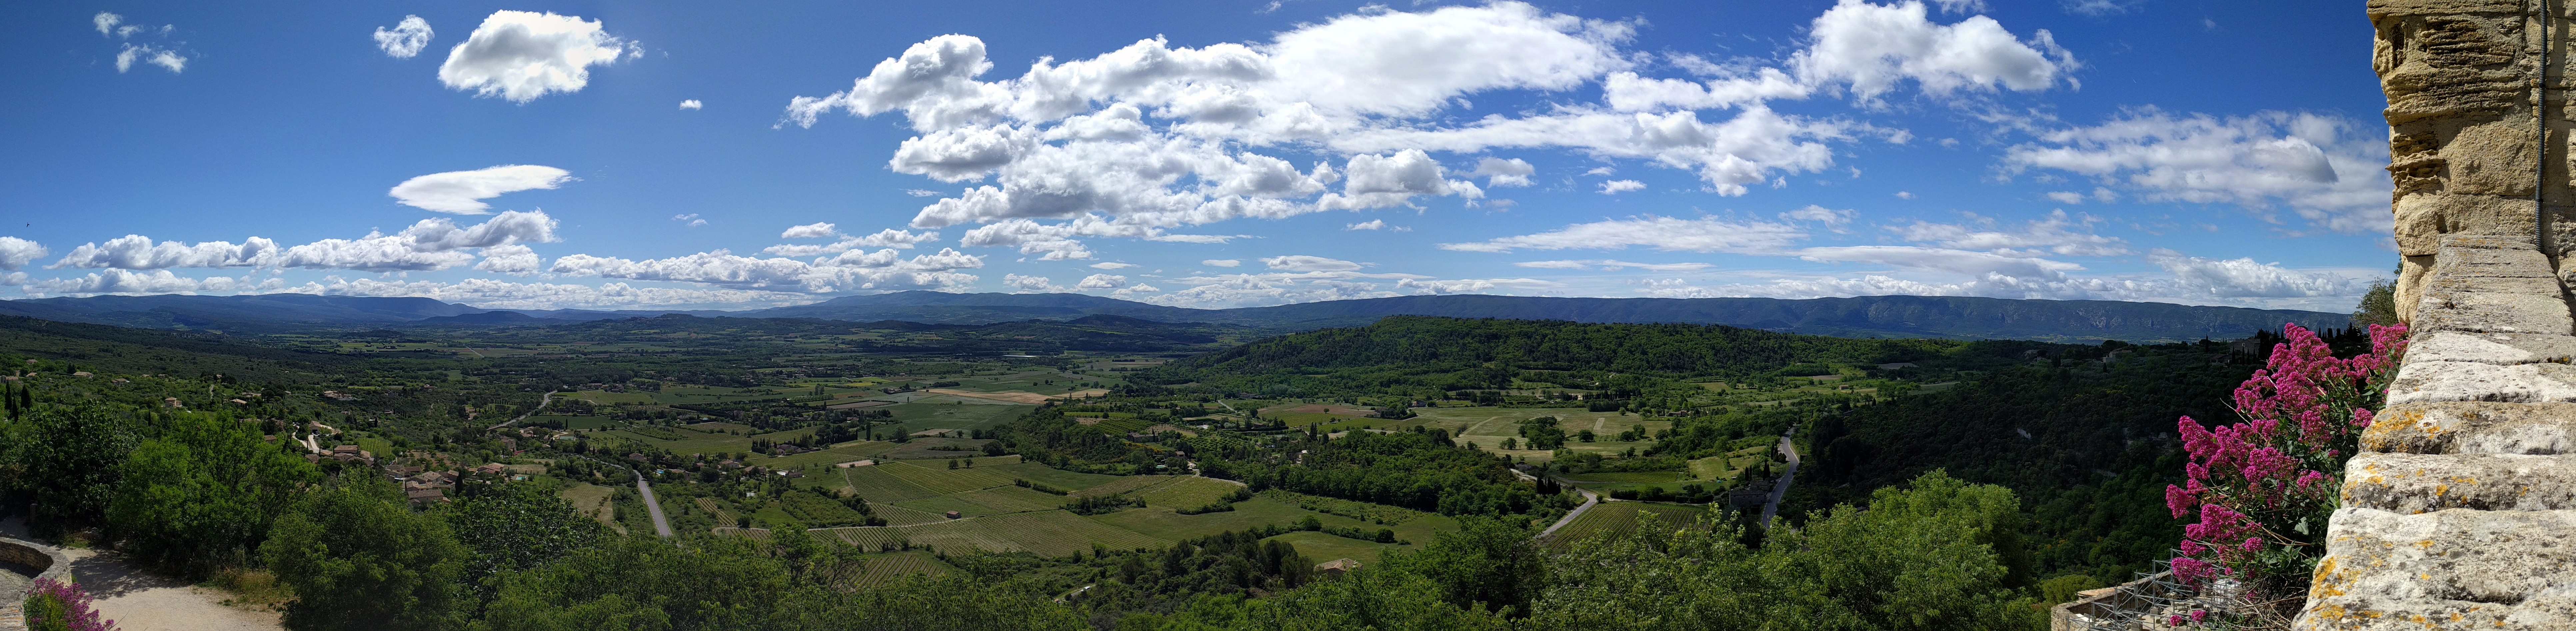 One more panorama from Gordes